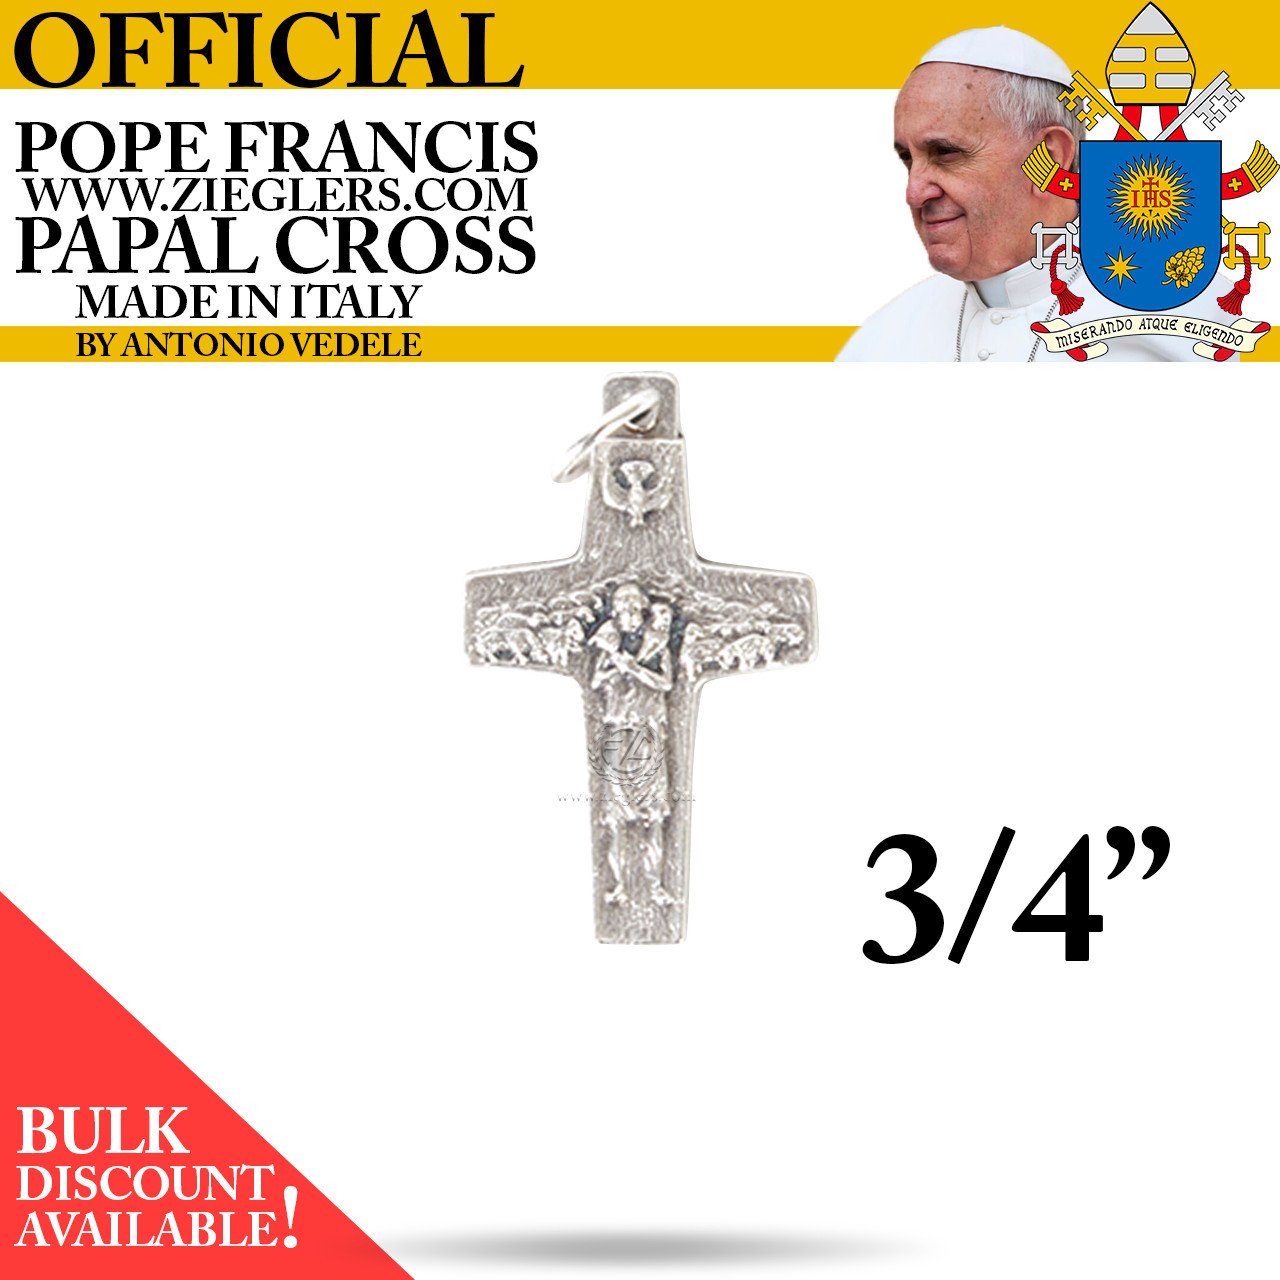 Official Pope Francis three fourths inch Papal Cross made of oxidized metal with image of Holy Spirit dove and good shepherd with sheep made in Italy G350